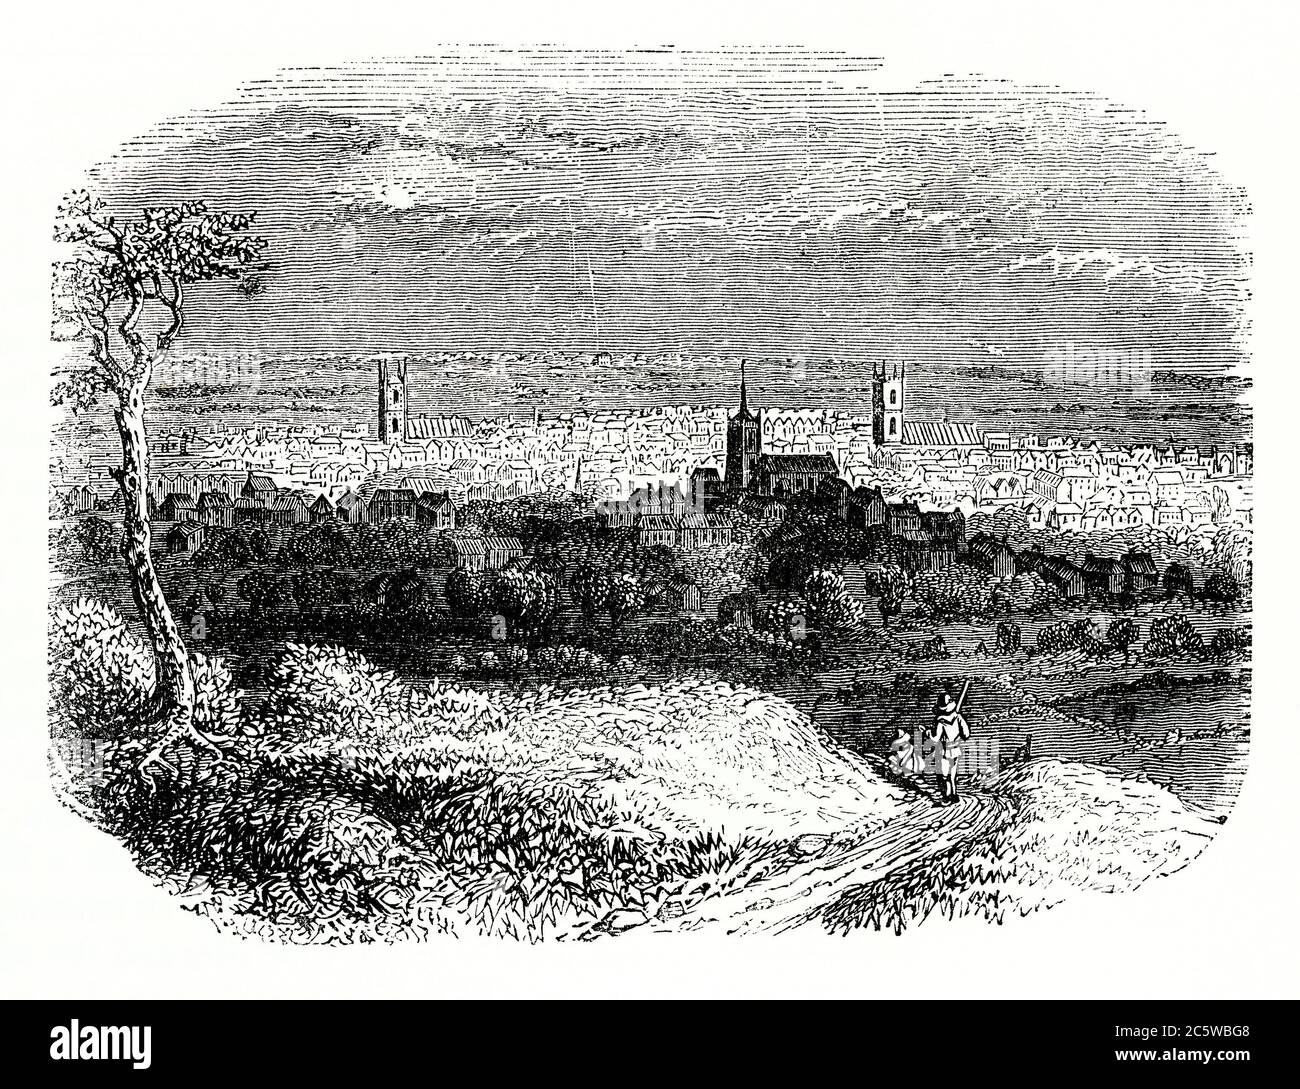 An old engraving of Reading, Berkshire, England, UK. The view is from the north at Caversham Hill. The large market town sits on the confluence of the rivers Thames and Kennet. Stock Photo